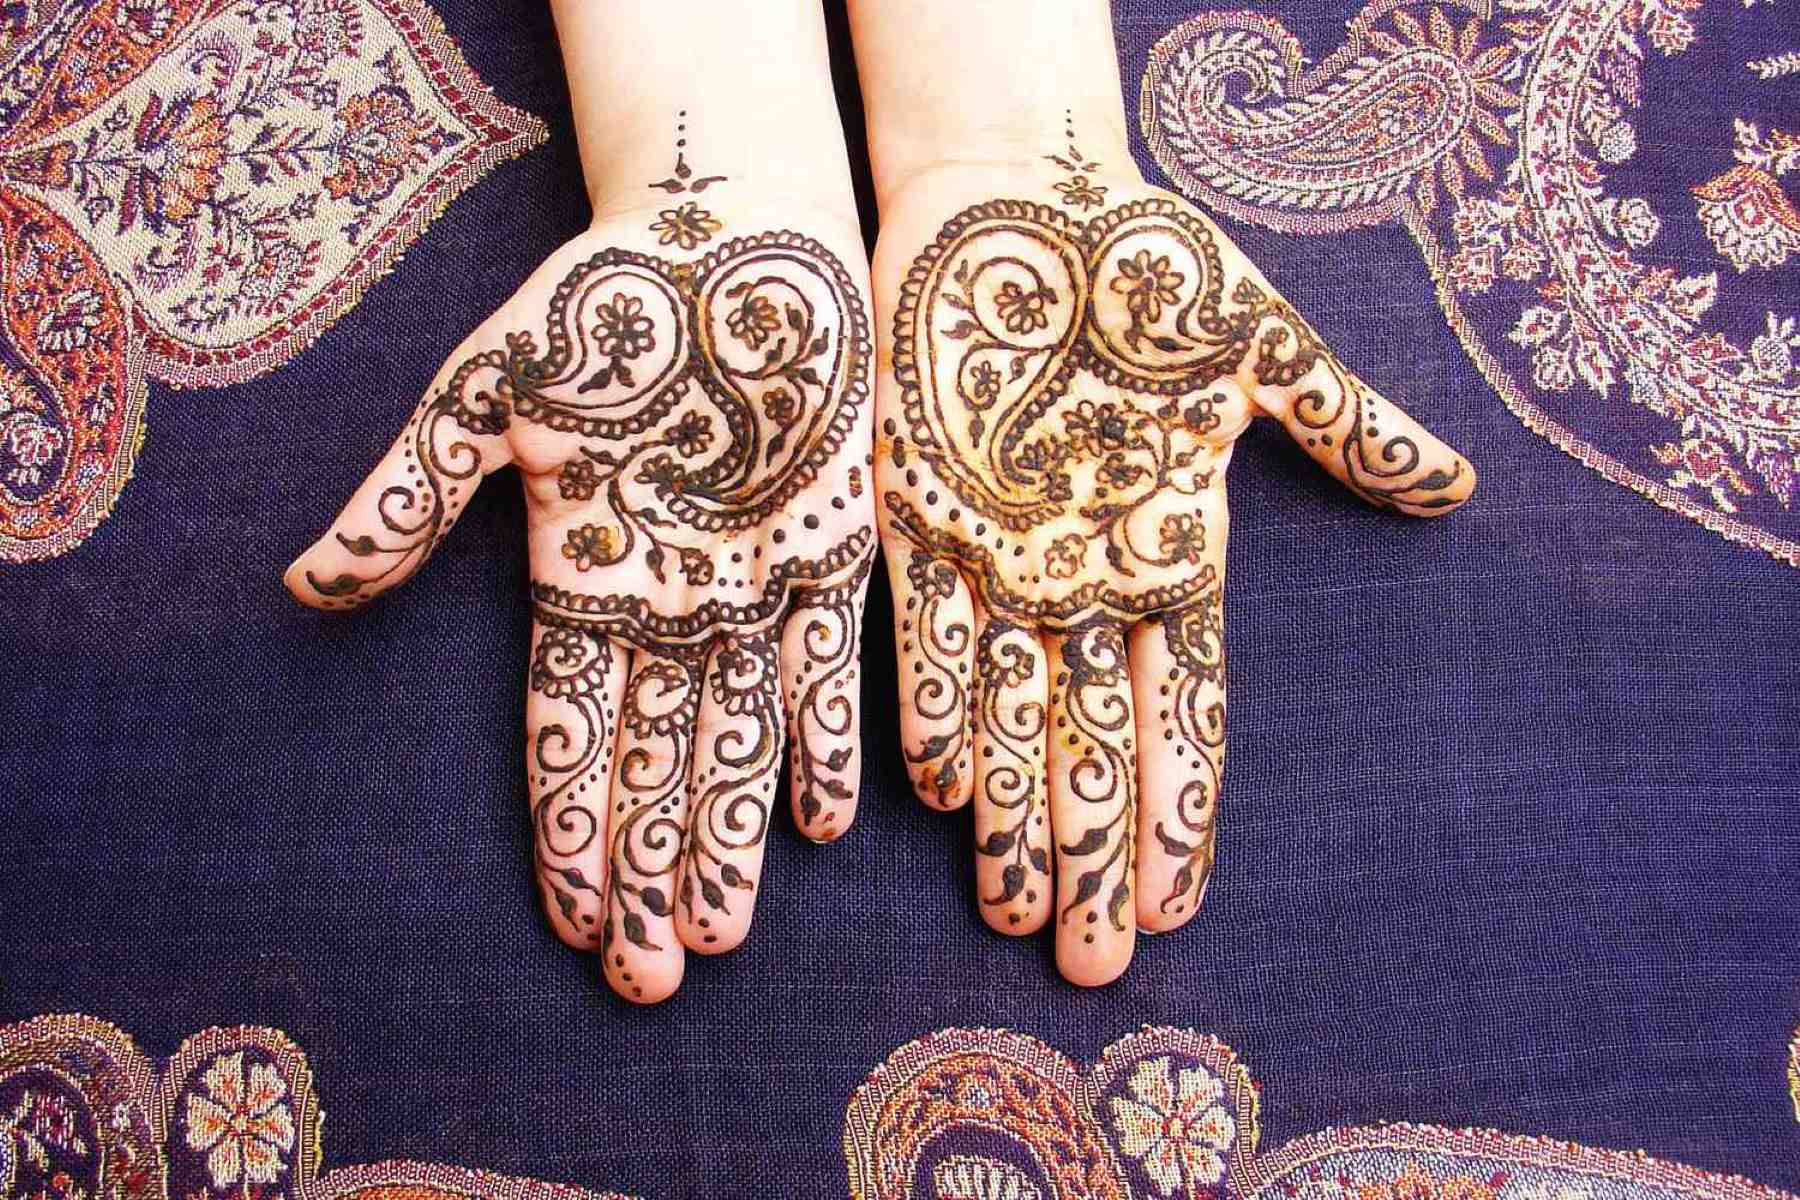 The Etiquette Of Using Henna For Temporary Tattoos: Is It Disrespectful?